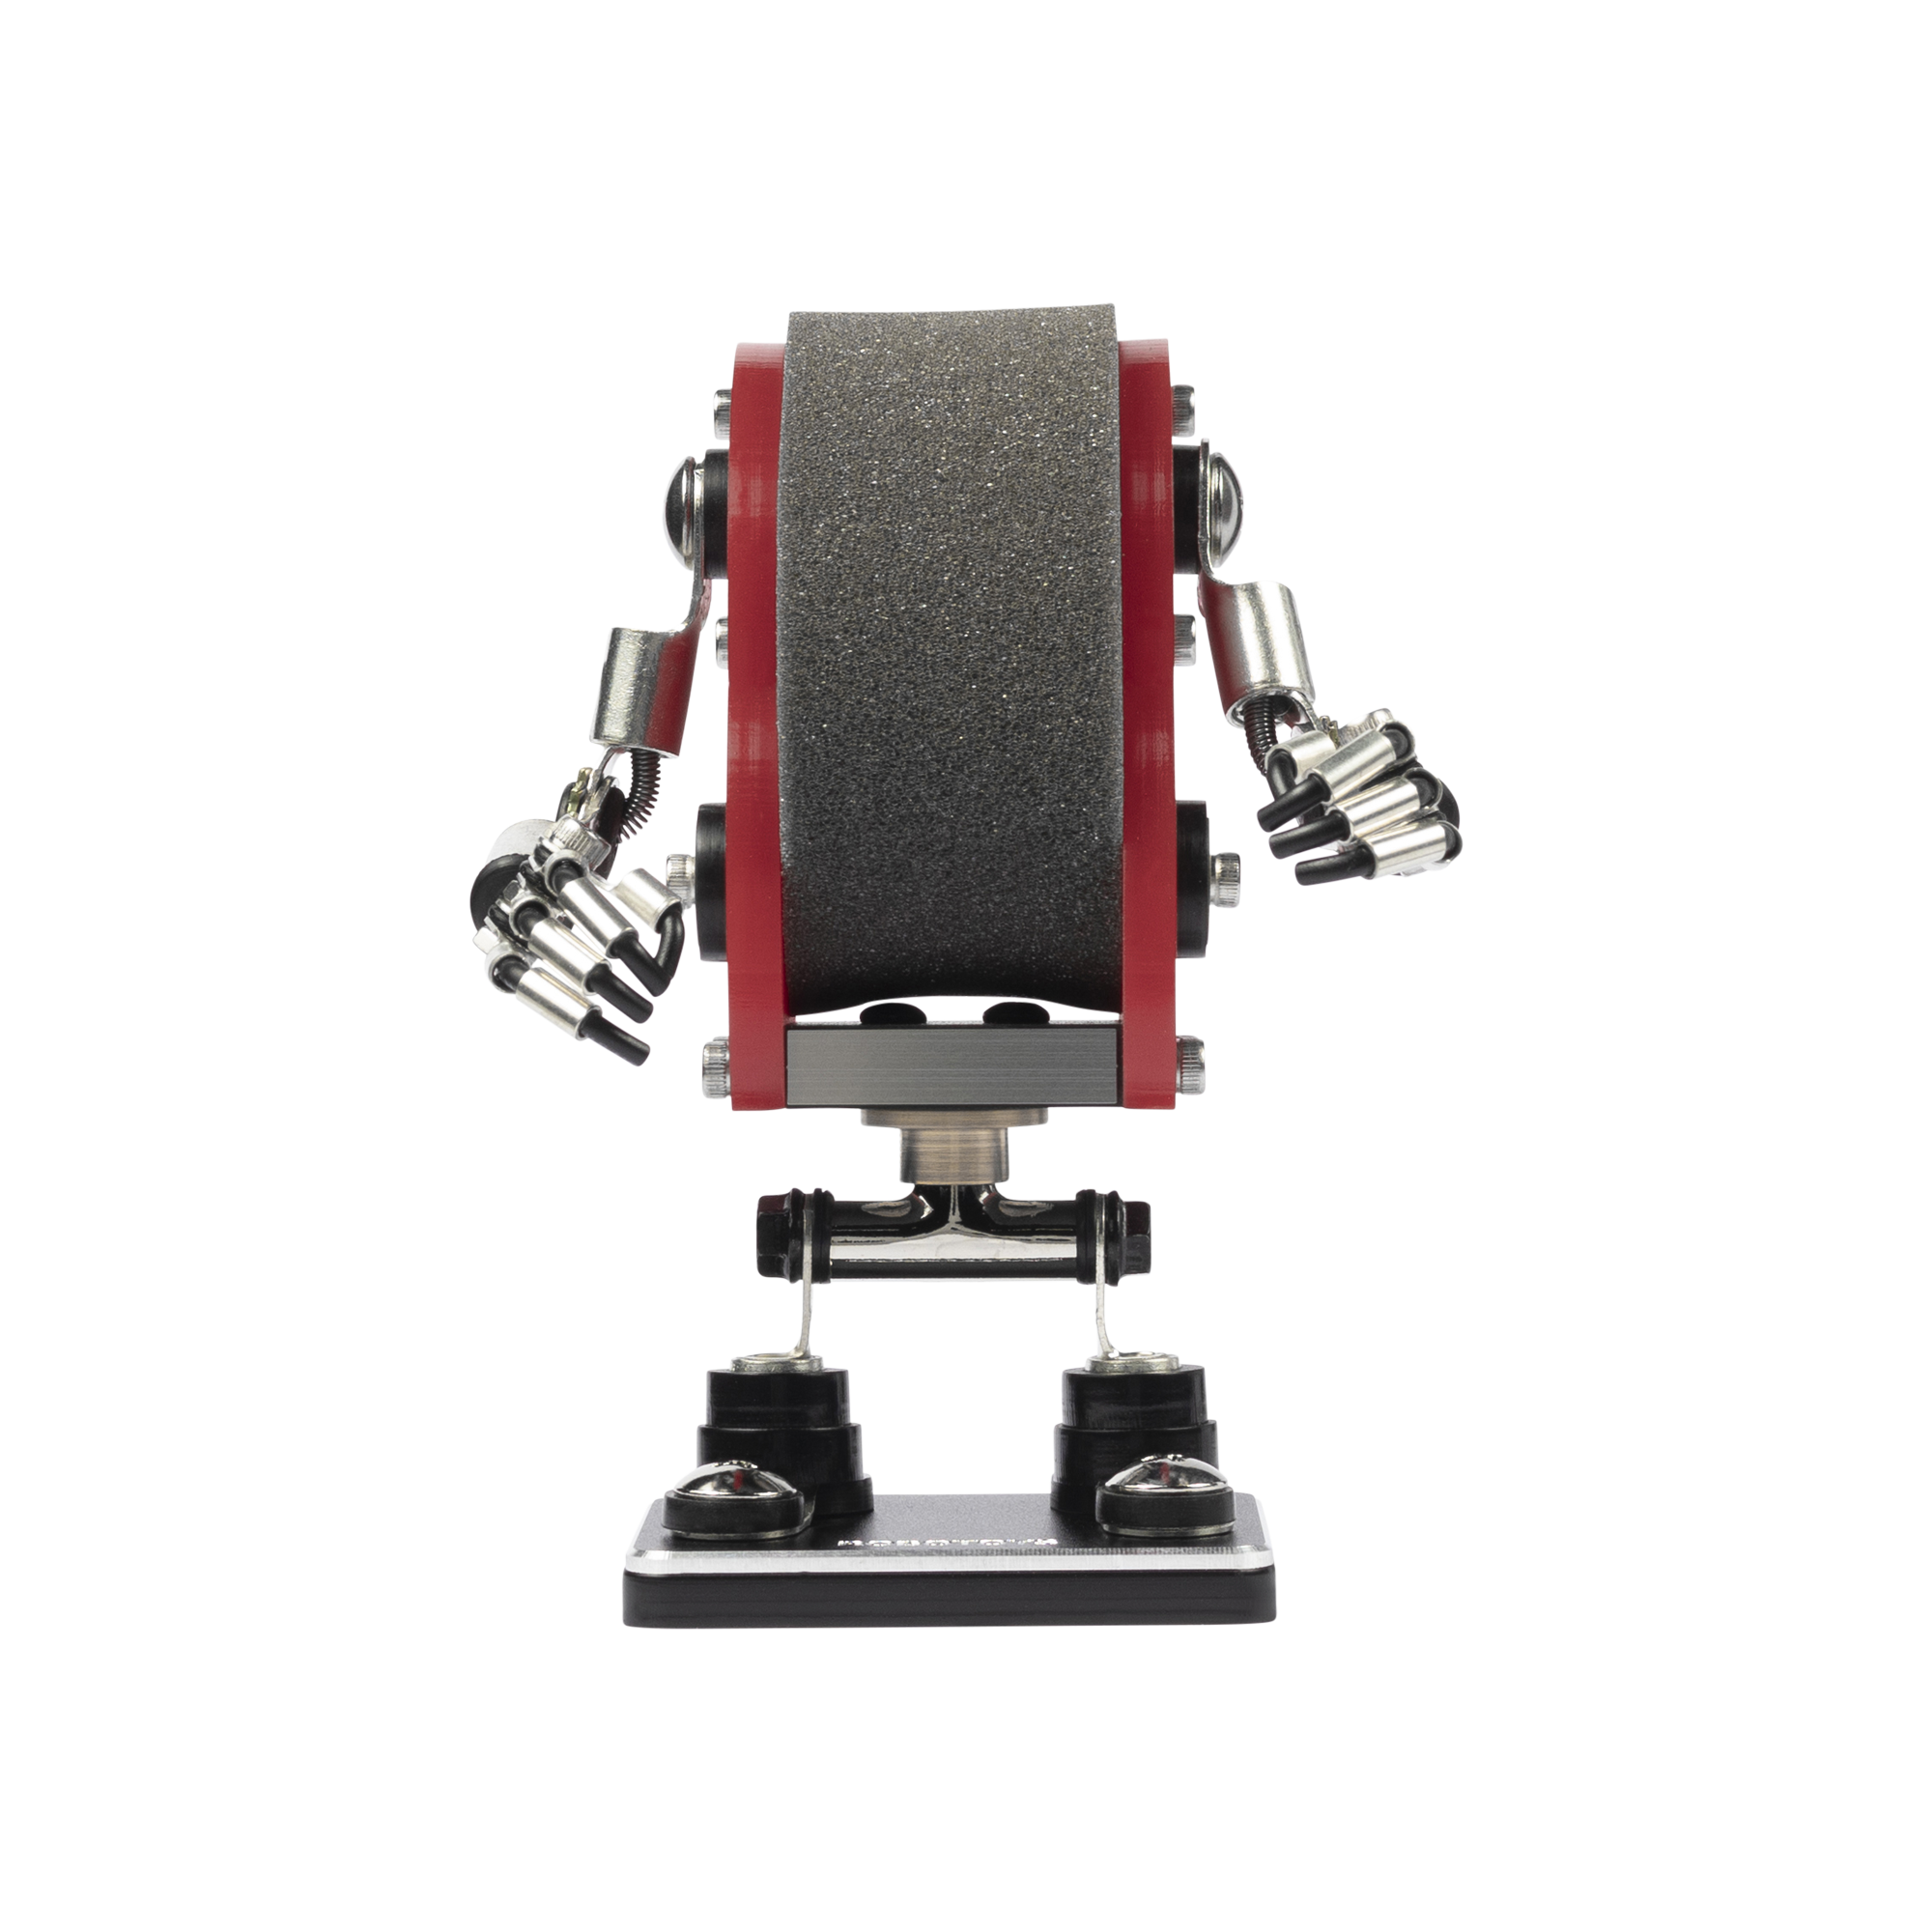 [RoboToys] Watch Stand - Minibot - Red